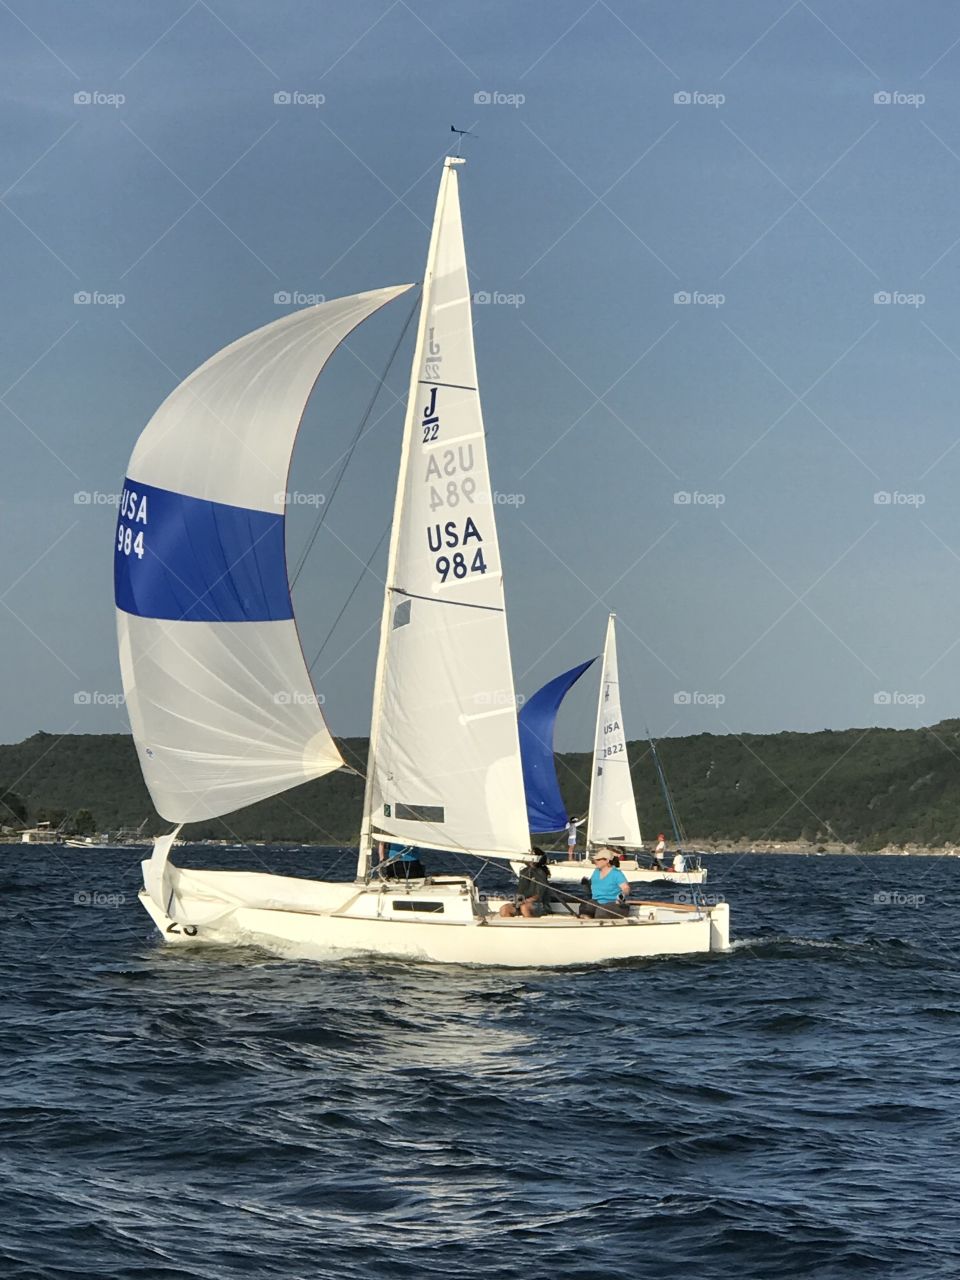 J22 Sailing in Sailboat Race with spinnaker on downwind run